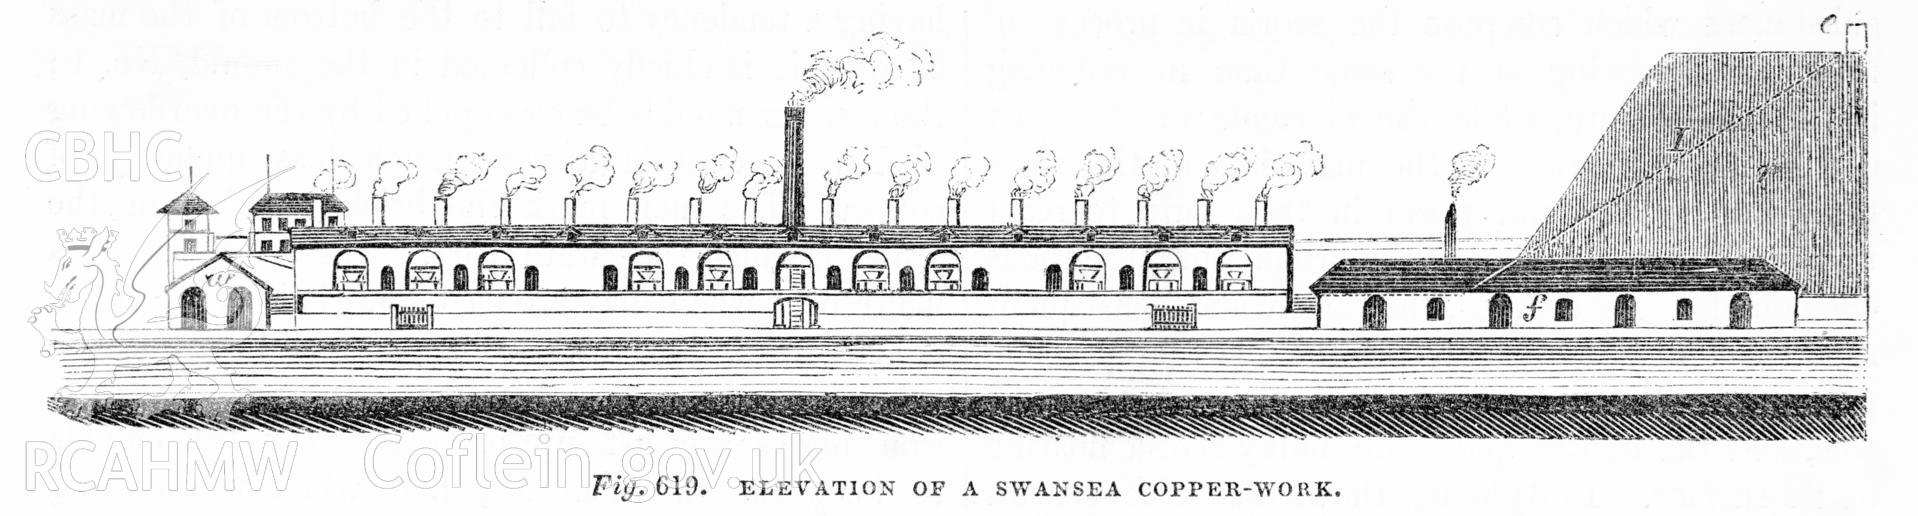 Digitized image of a drawing of the elevation of Swansea Copperworks. Fig 619 from Tomlinson's 'Cyclopedia of Useful Arts, Manufacturing, Mining and Engineering' Vol I.